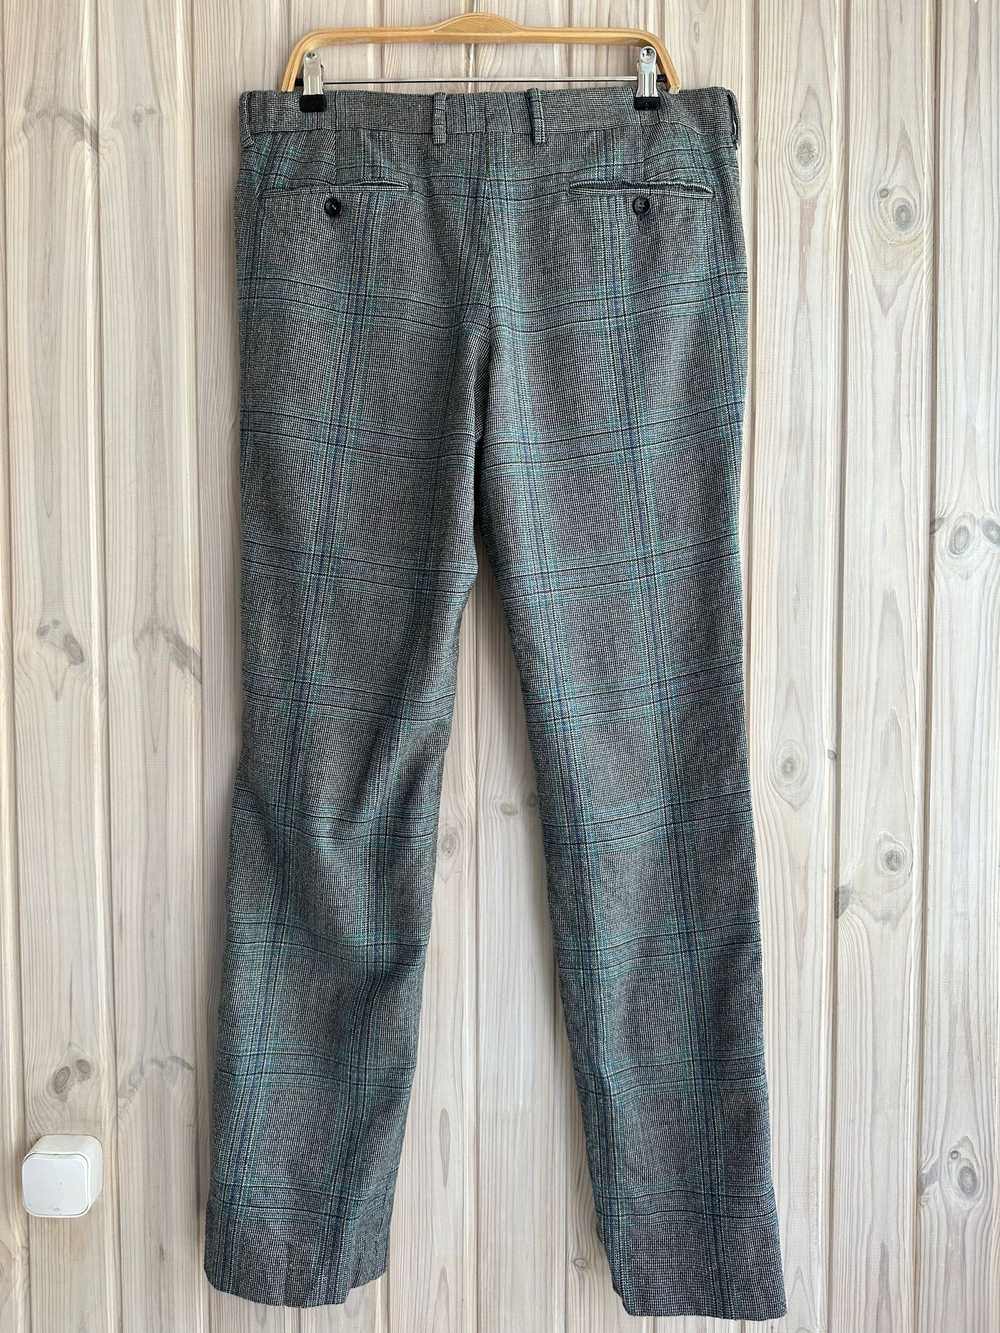 Gucci GUCCI Wool Mohair Plaid Check Trousers - image 7